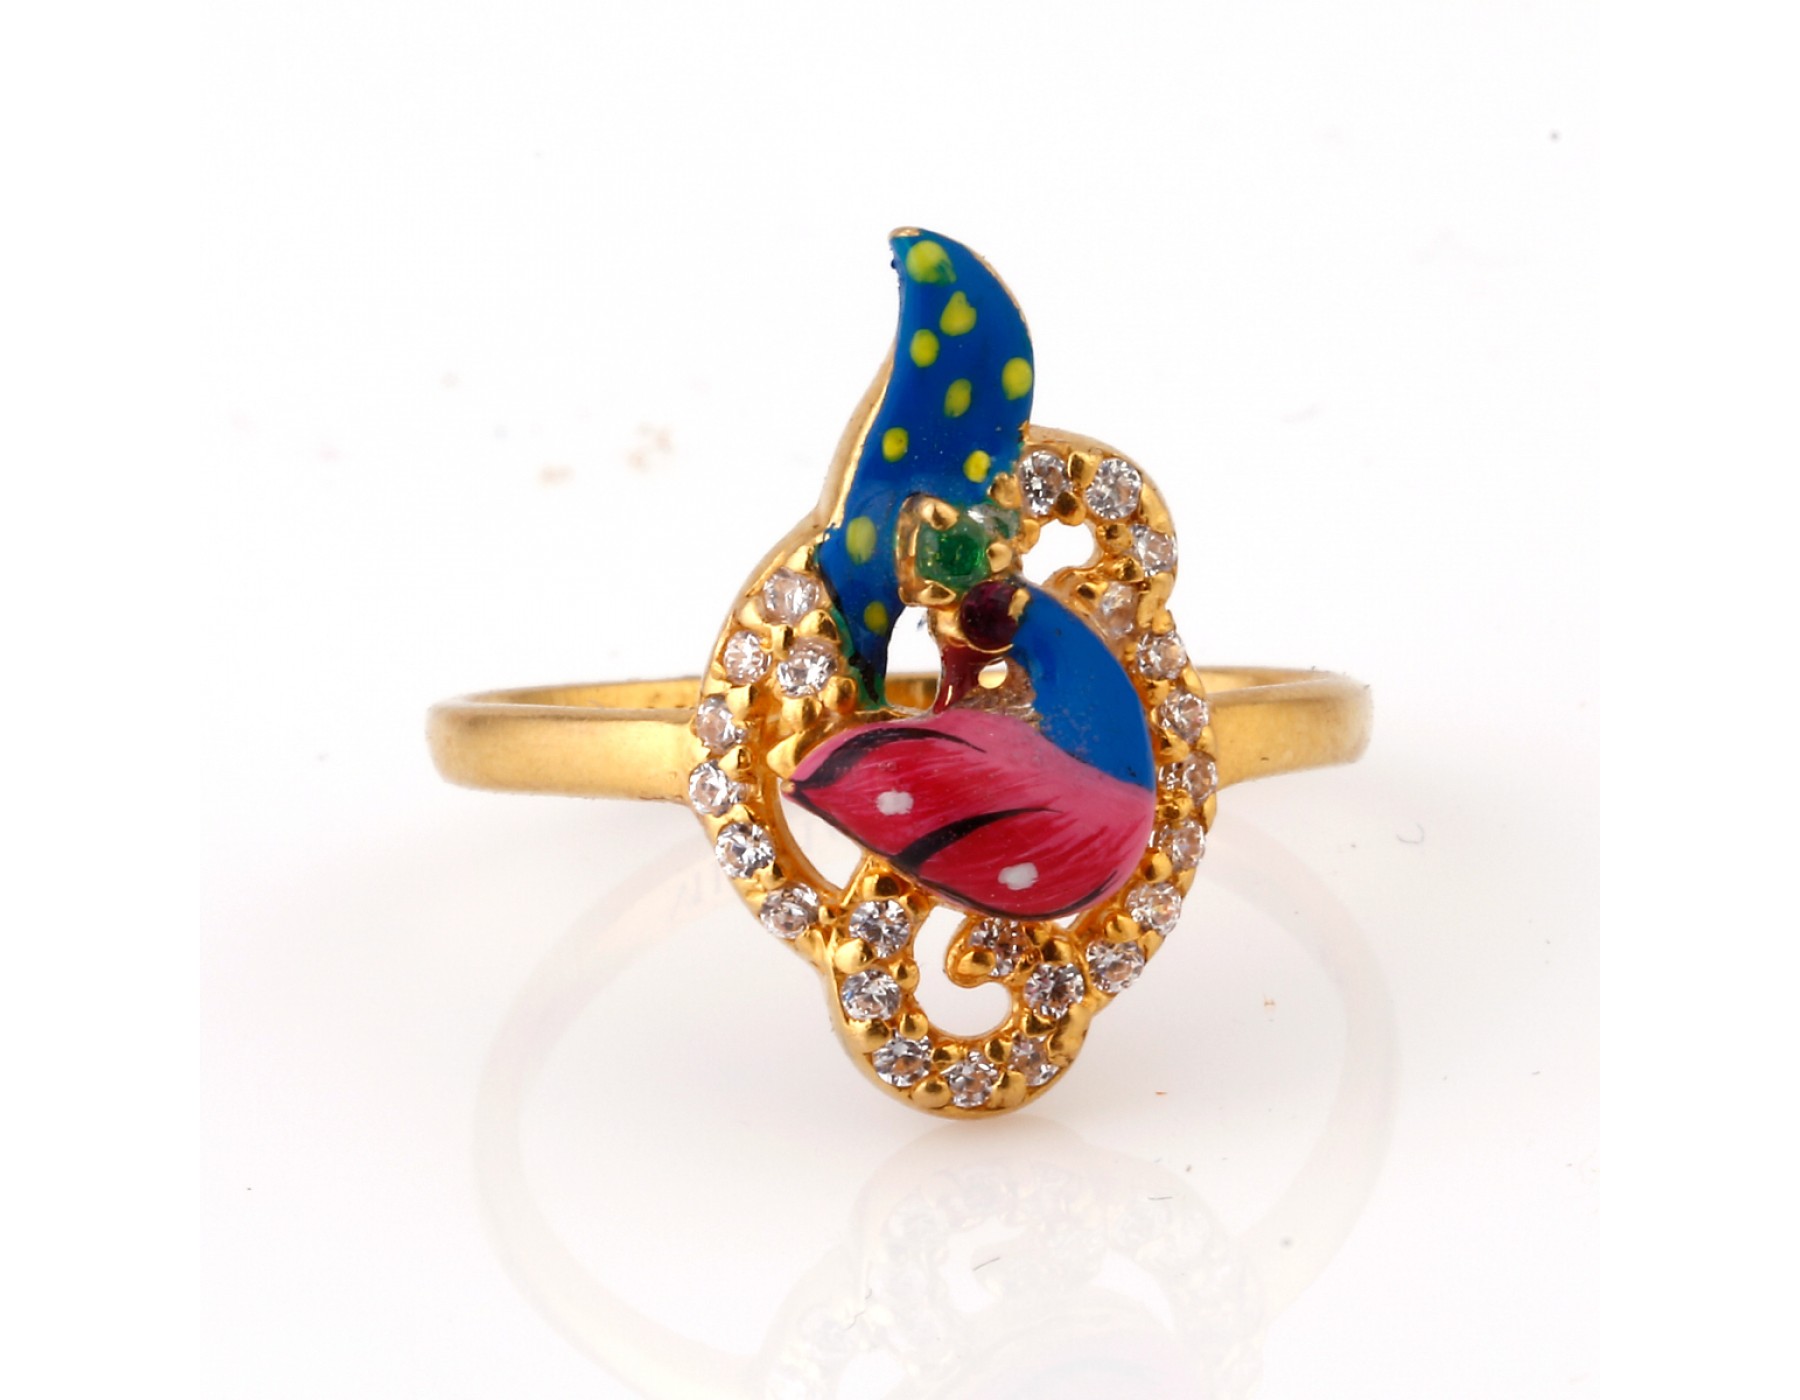 22K Gold Peacock Ring (4.15) - Queen of Hearts Jewelry